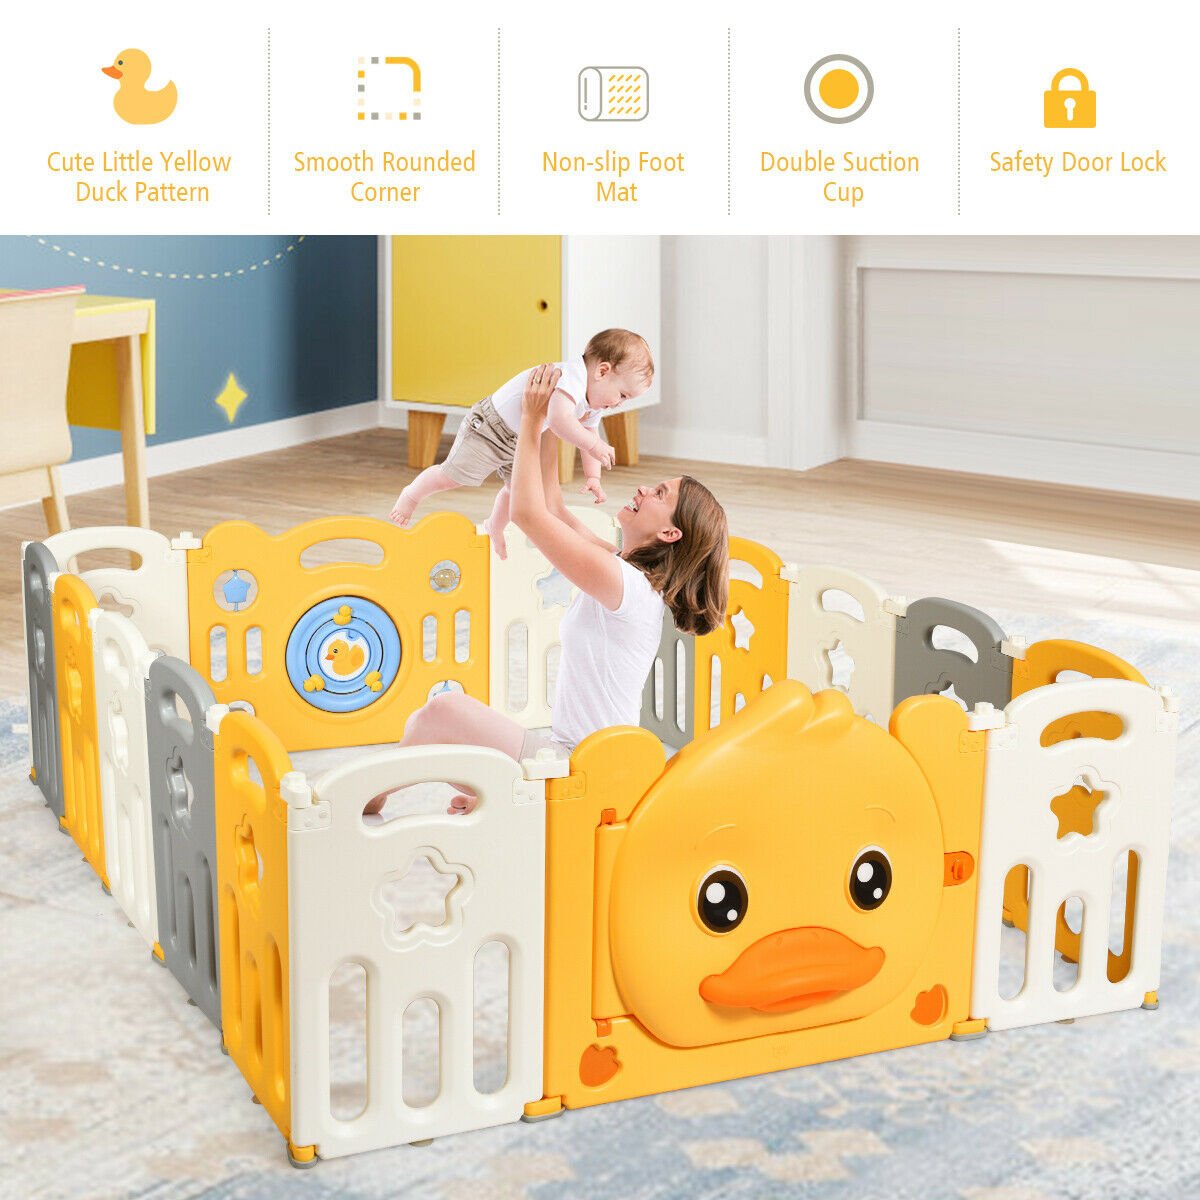 Secure Baby Play Area - Non-slip base and safety lock for worry-free playtime